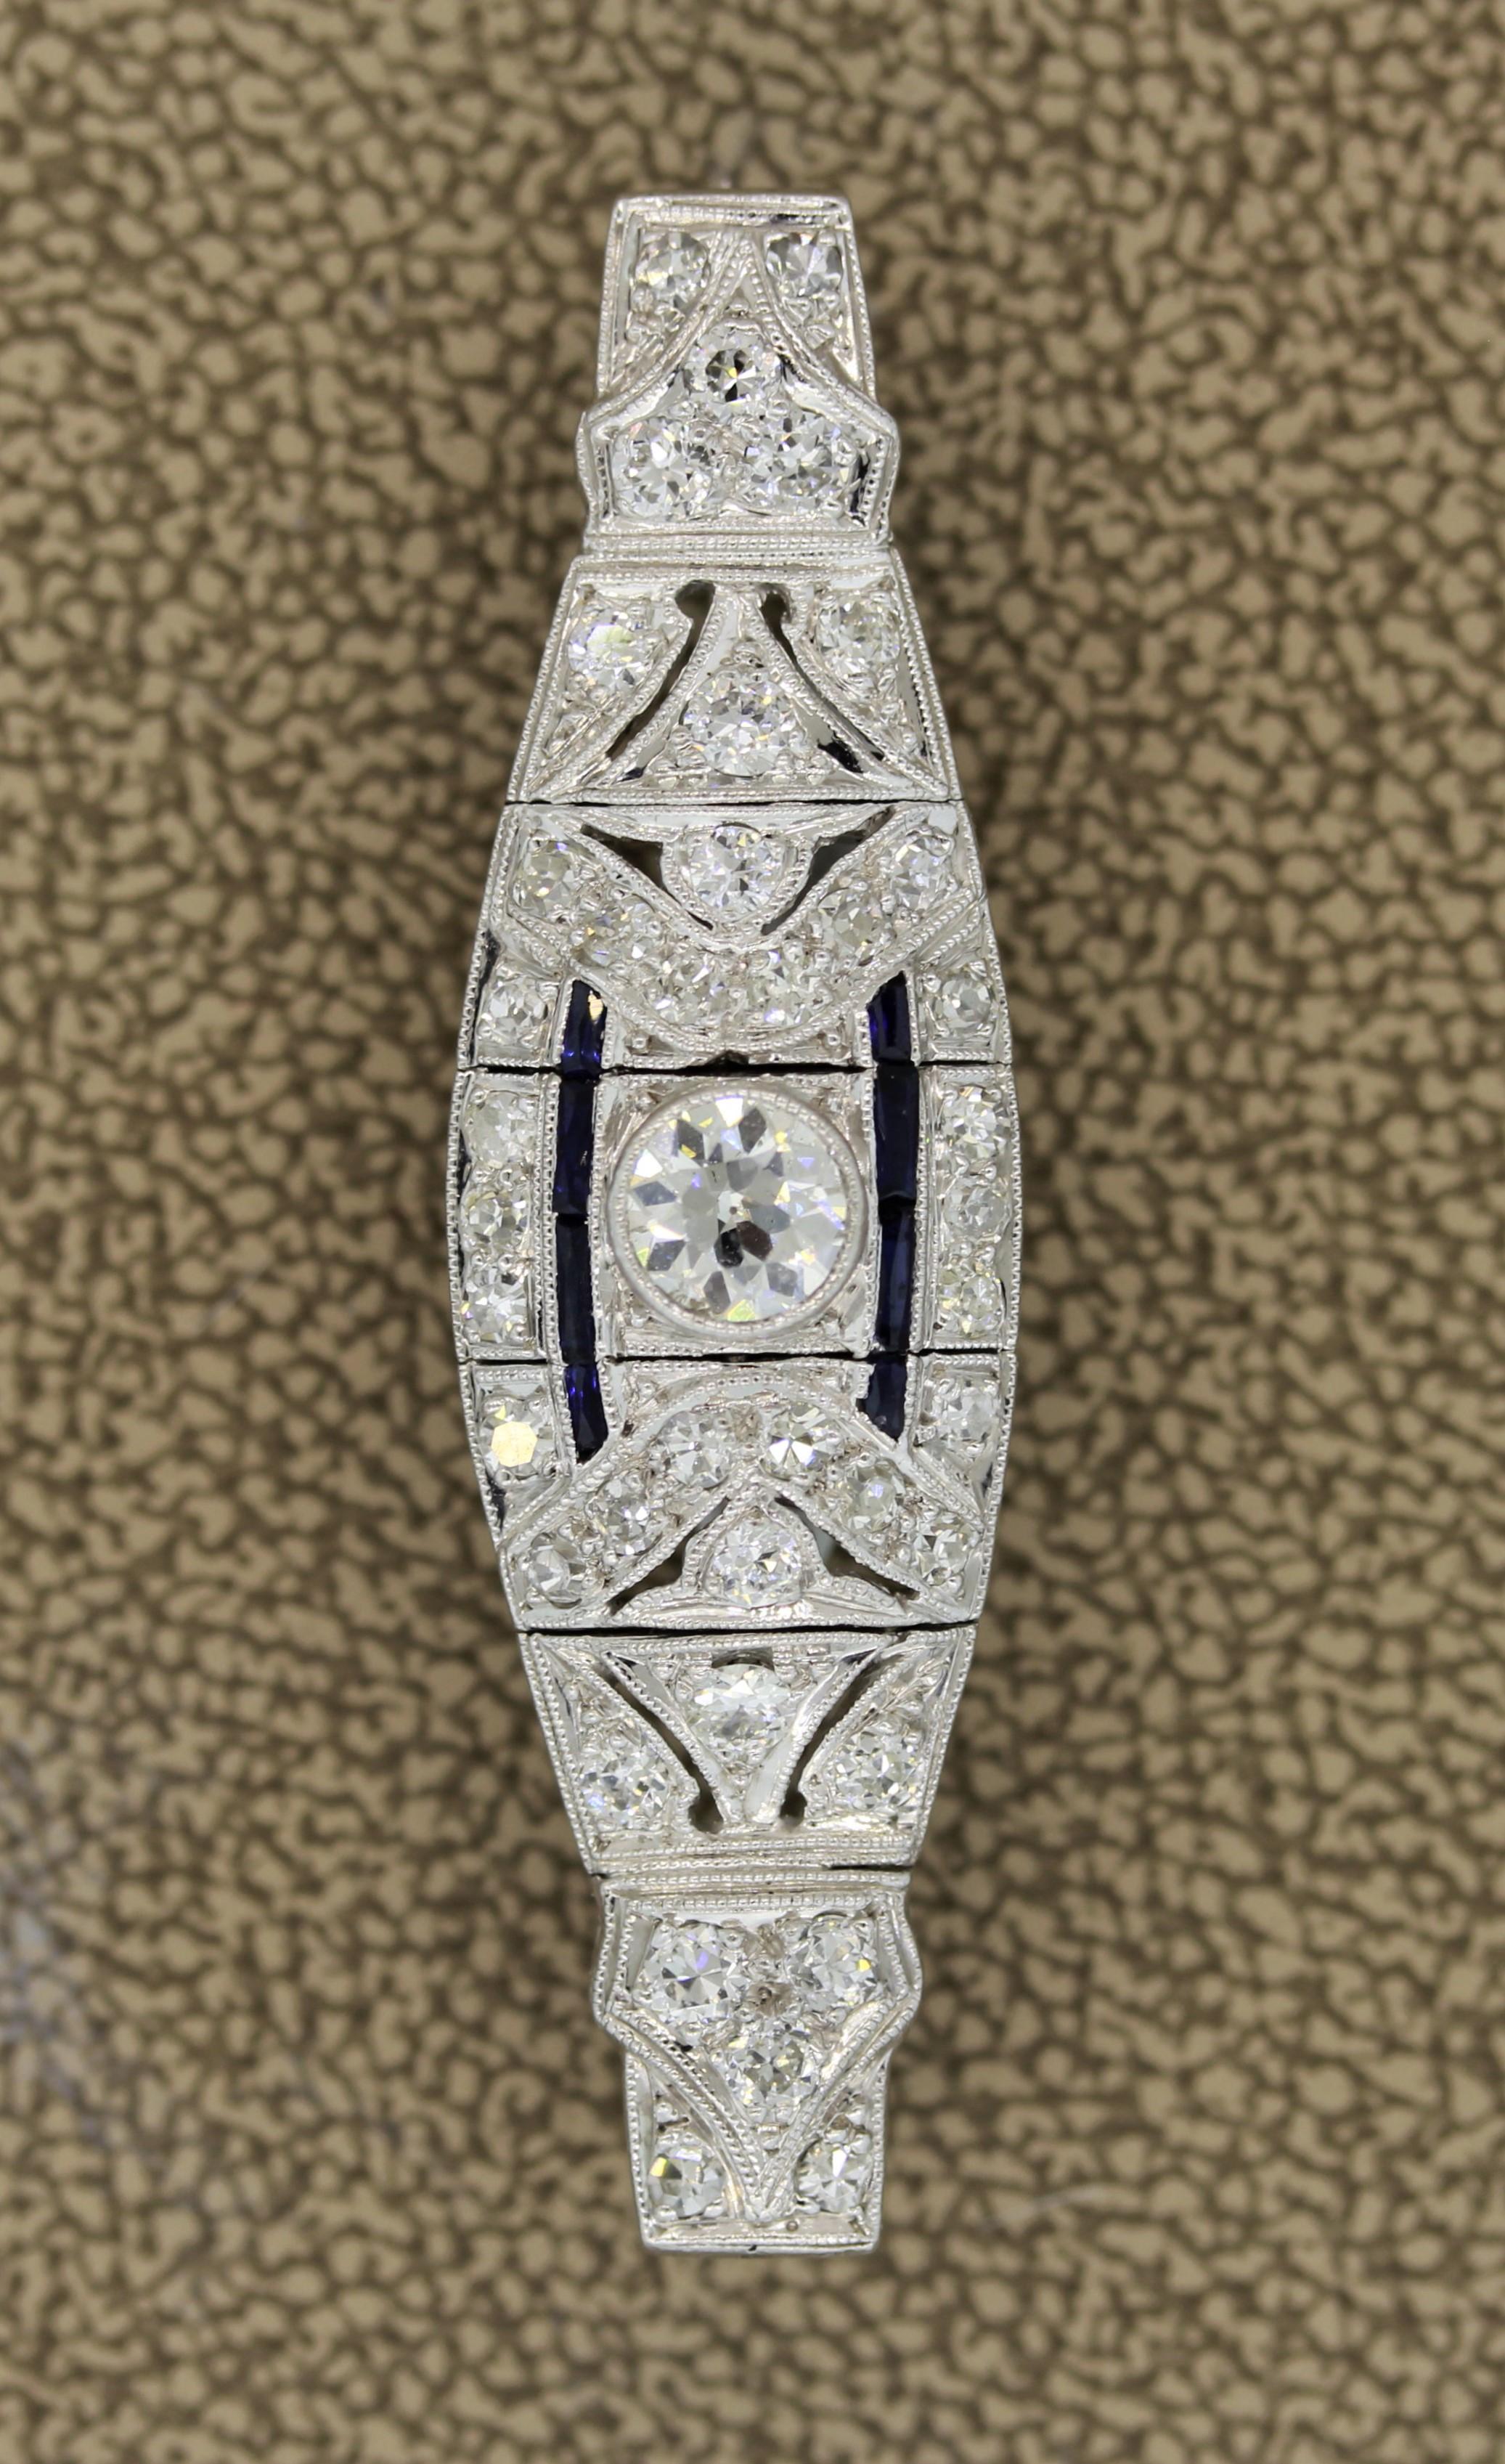 A lovely piece from the Art Deco era, circa 1925. It features a European cut diamond set in the center weighing 0.55 carats. It is accented with an additional 1 carat of smaller European cut diamonds set around the piece with blue sapphires as well.